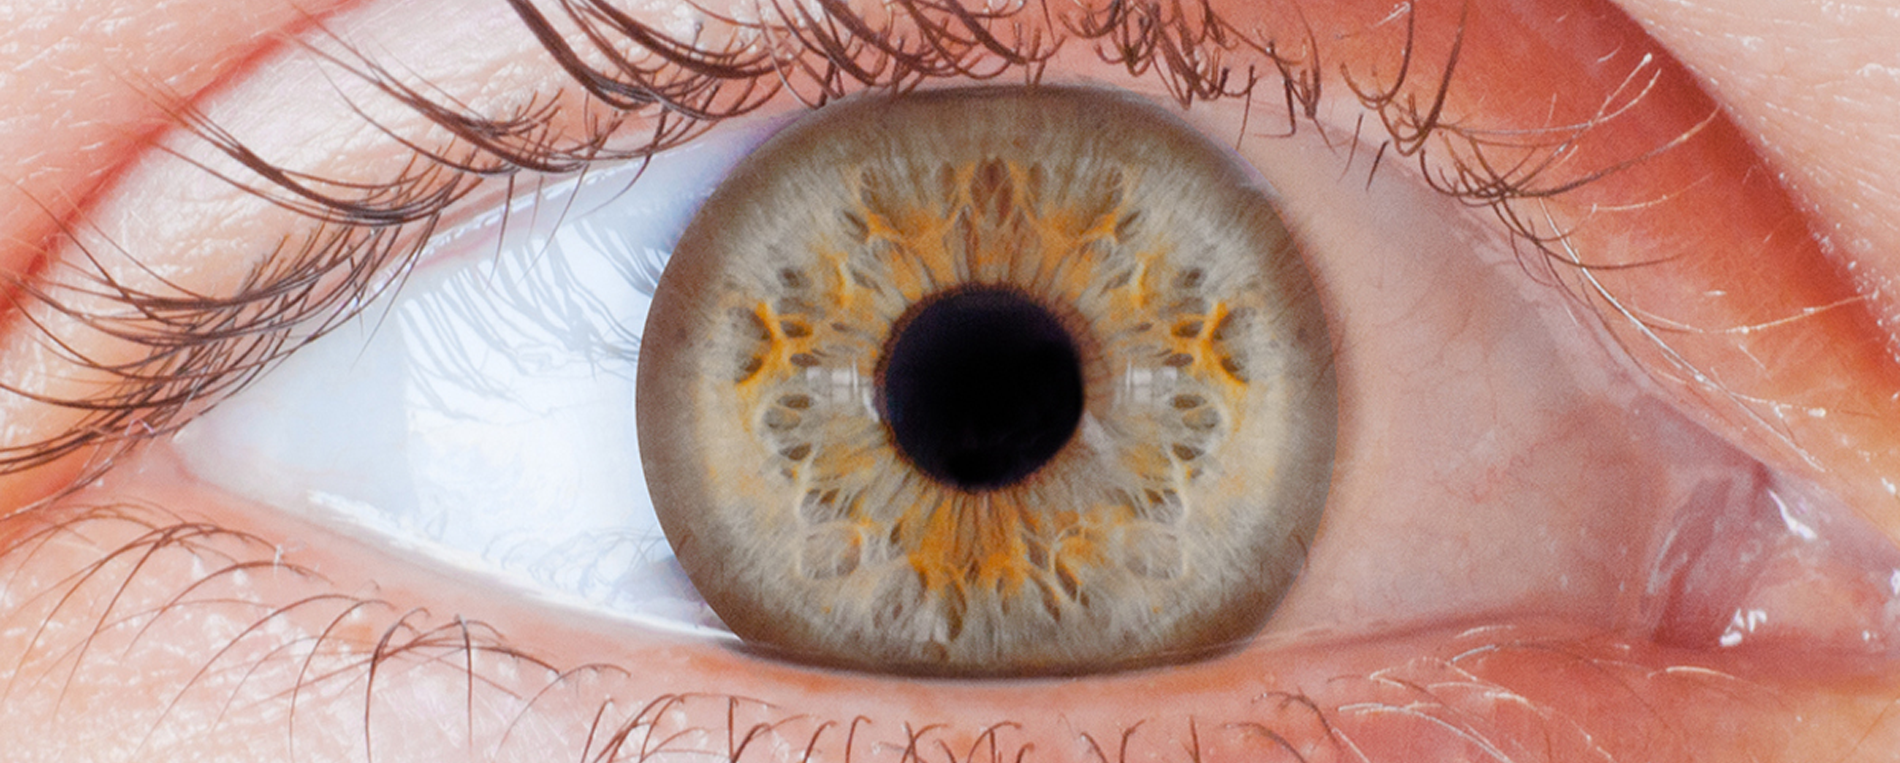 Canadian Ophthalmology Curriculum Topics, Objectives, & Resources